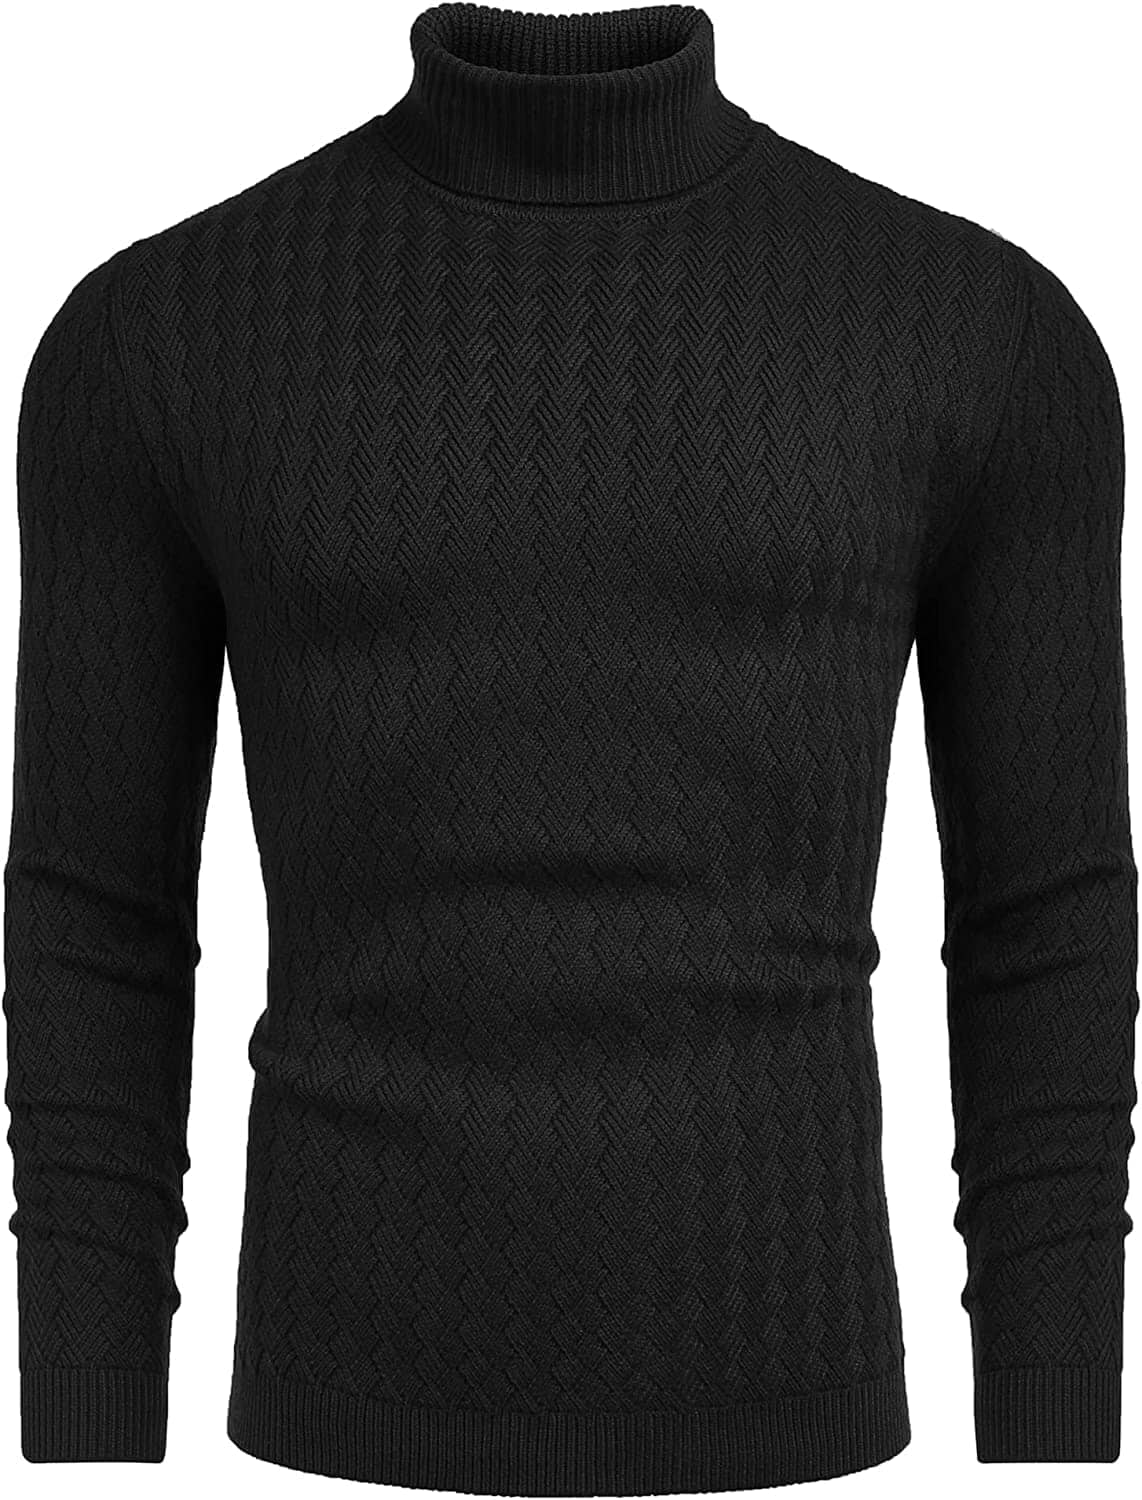 Turtleneck Patterned Knitted Pullover Sweater (US Only) Sweaters COOFANDY Store Black S 